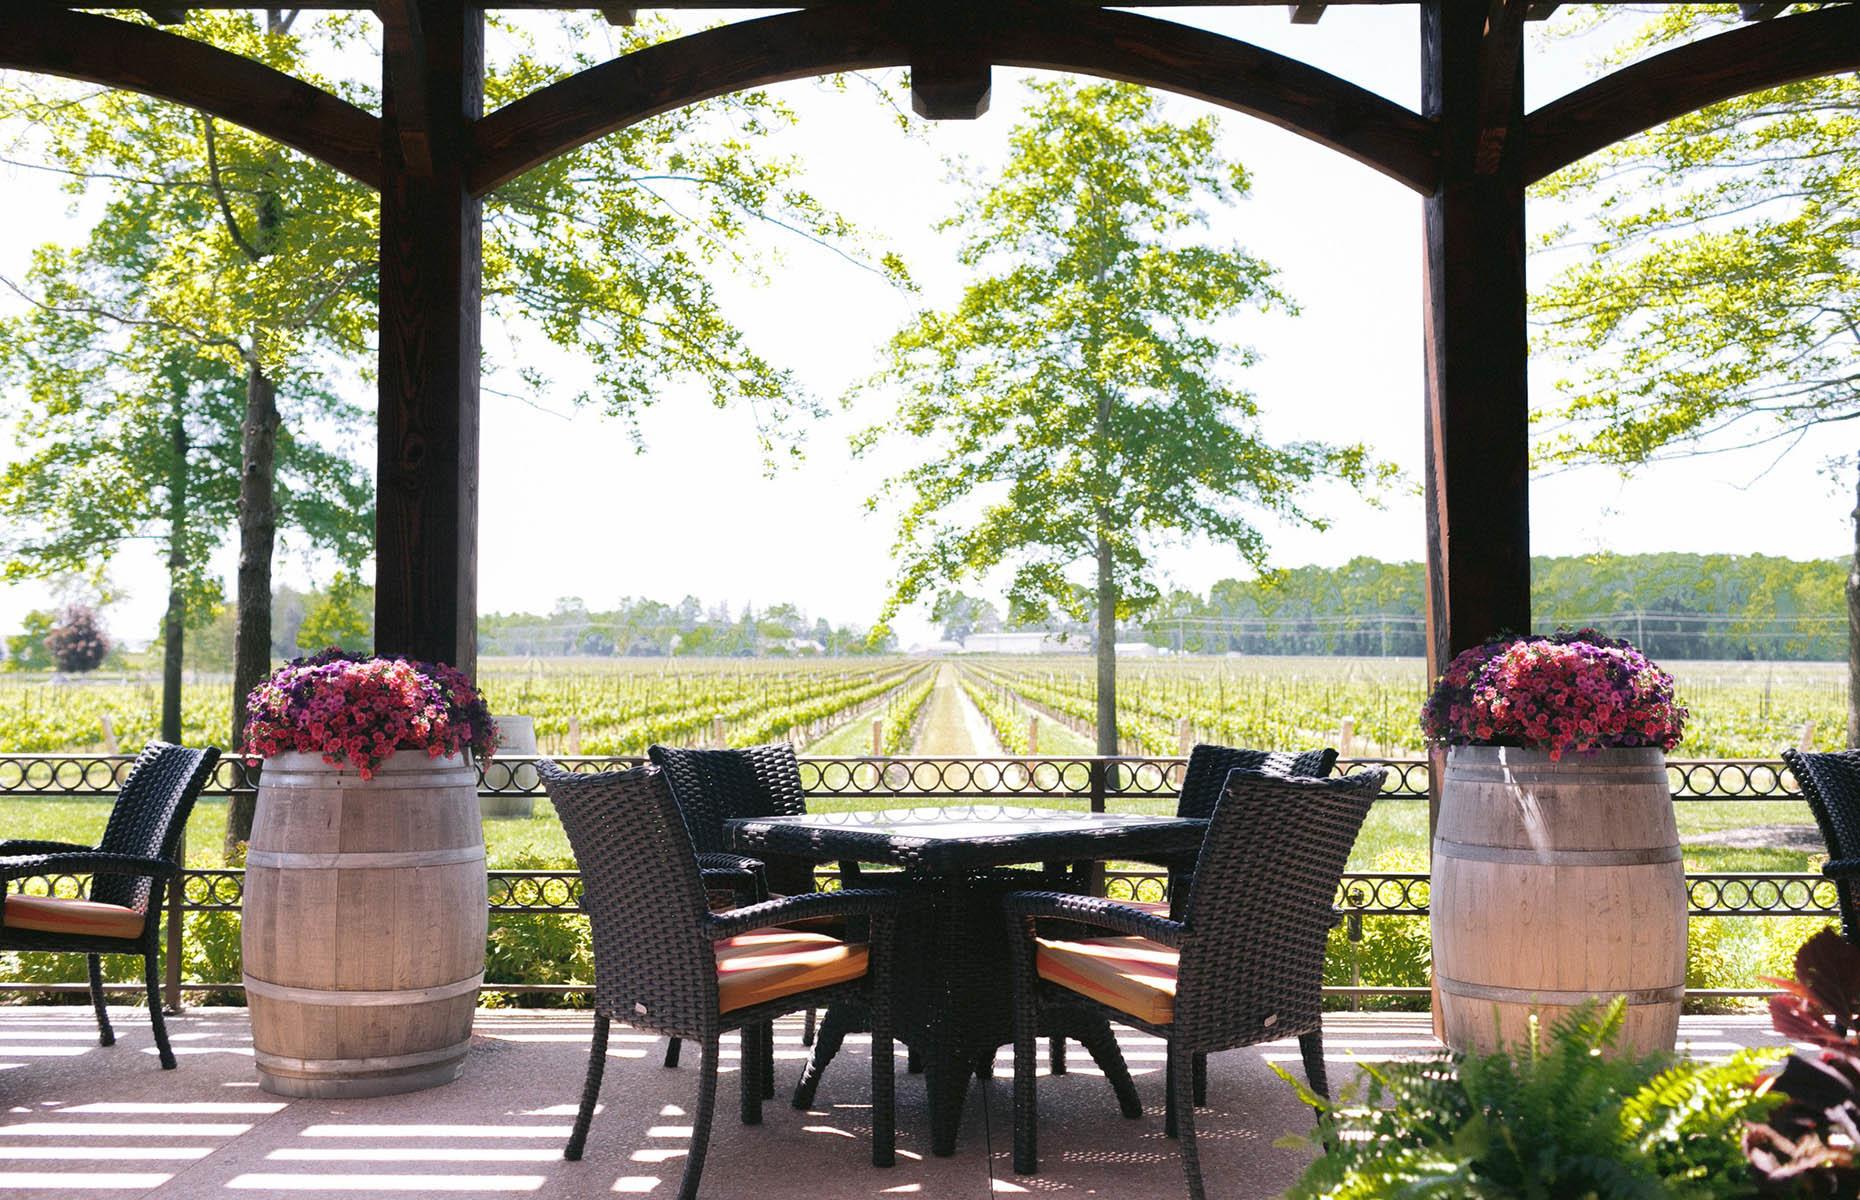 <p>Wine fans will relish the prospect of visiting top-class vineyards in Niagara-On-The-Lake, particularly <a href="https://www.peller.com/">Peller Estate</a> and <a href="https://www.twosistersvineyards.com/">Two Sisters</a>. The Peller brand can be spotted all over Ontario and is worth the hype.</p>  <p>Tours include tastings from the 44-acre estate’s wine portfolio, with a stop off in the 10Below Icewine Lounge – an igloo-esque room that’s kept at -10°C (14°F), where you can sample the painstakingly delicious icewine; just 1mm is produced from 10 grapes. Two Sisters’ John Street Vineyard spans 68 acres, where merlot, cabernet sauvignon, cabernet franc and chardonnay varietals thrive.</p>  <p>The award-winning winery offers a tasting flight of four premium wines; our advice is to choose the cabernet franc – a fruity ruby red that’s been crafted in French oak for 30 months. Cheers!</p>